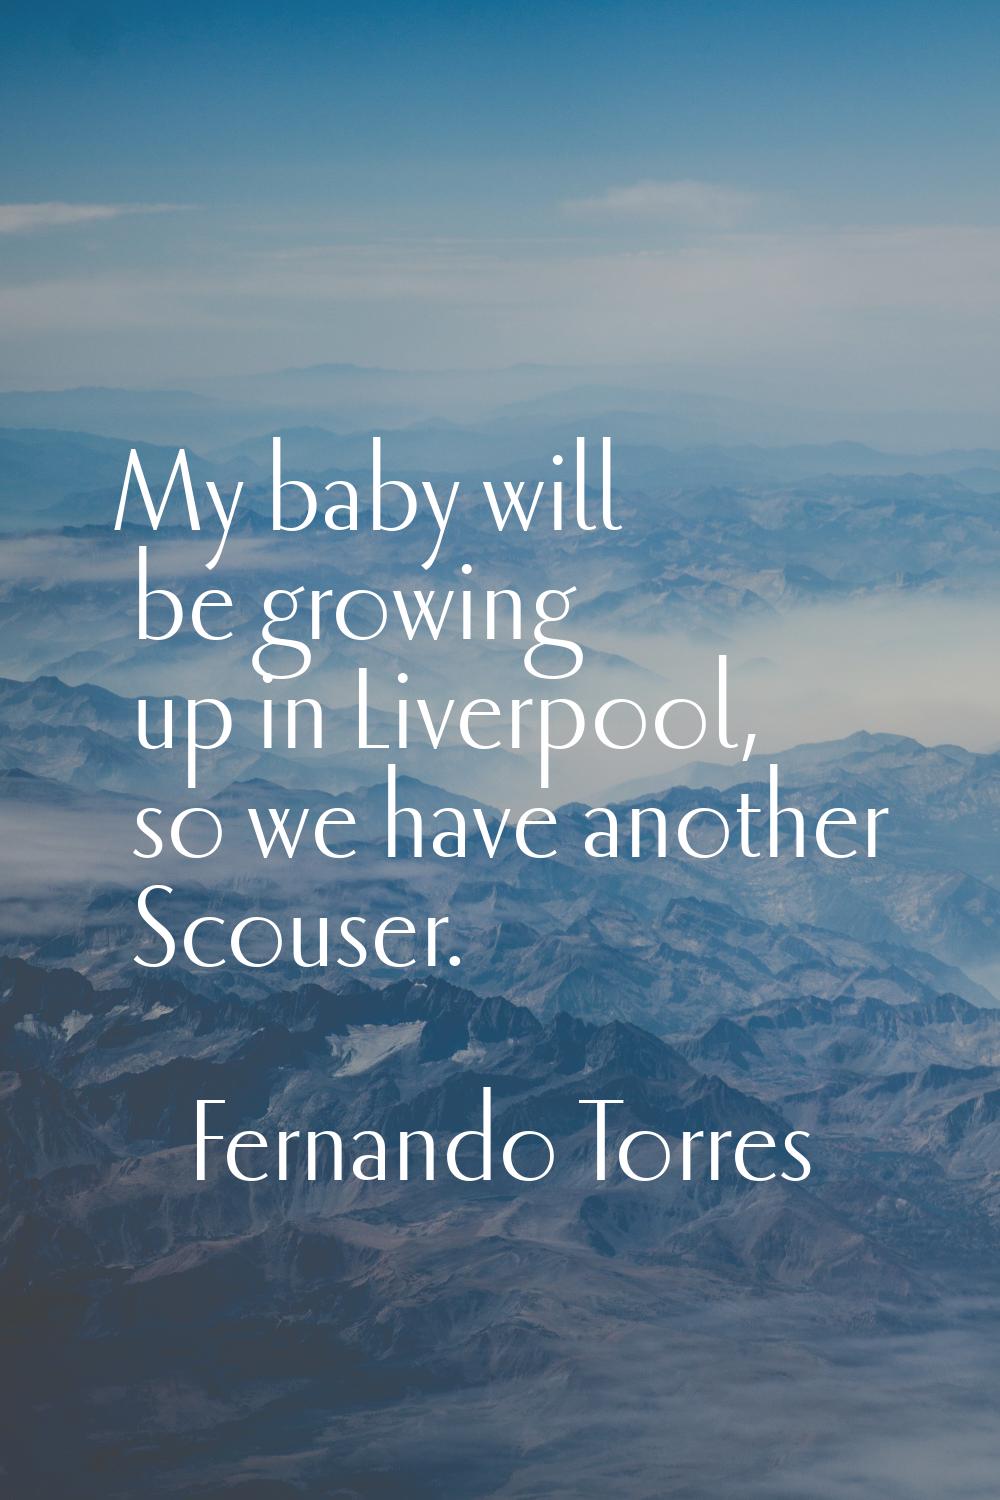 My baby will be growing up in Liverpool, so we have another Scouser.